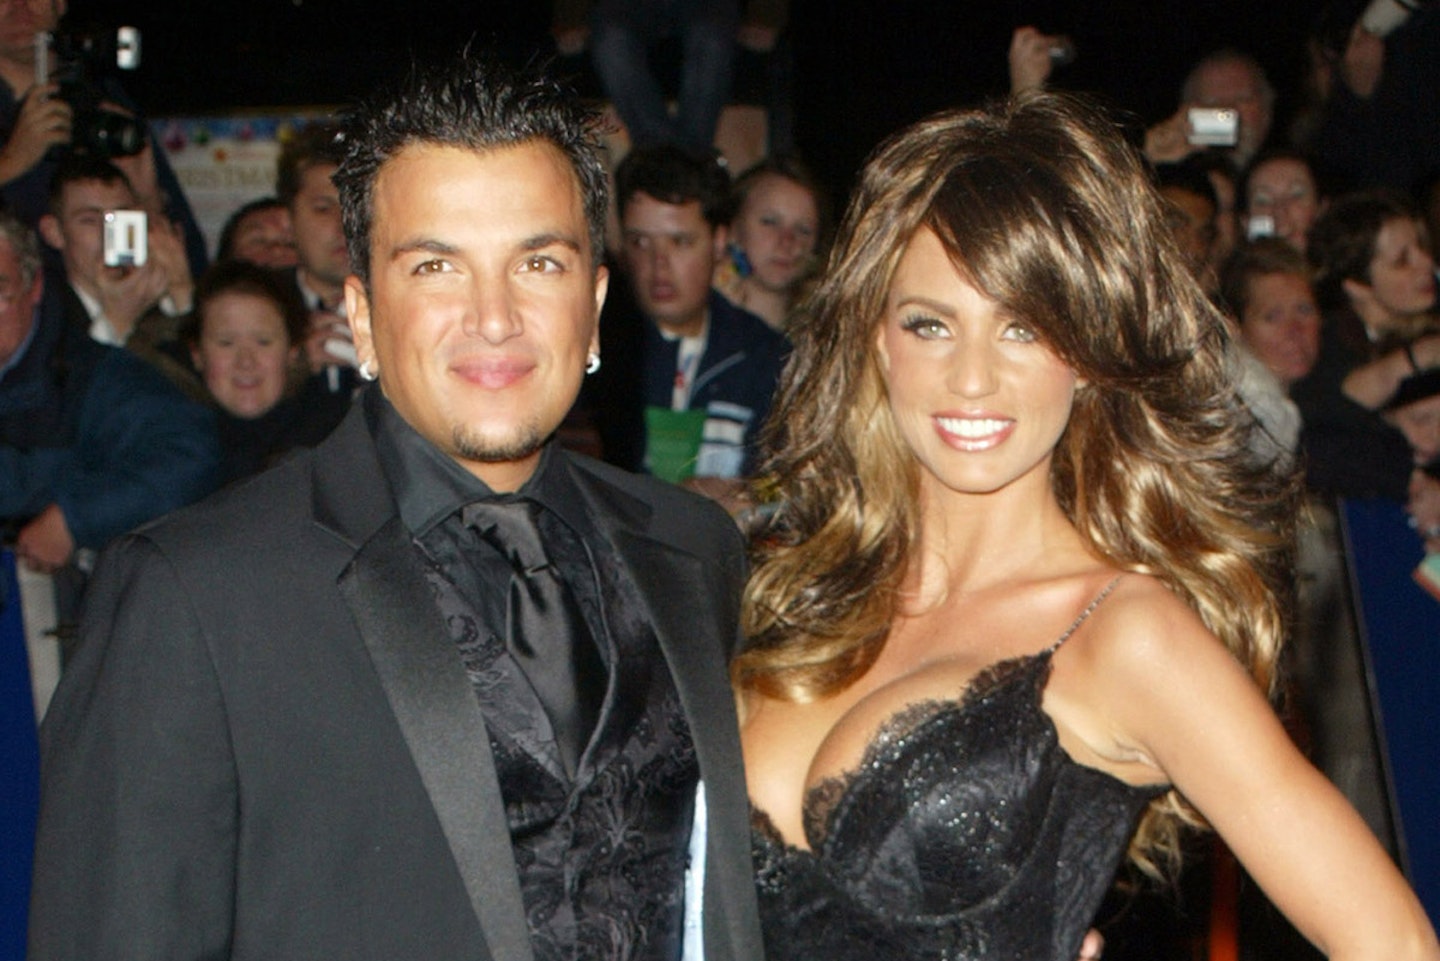 katie-price-spent-much-wedding-peter-andre-one-million